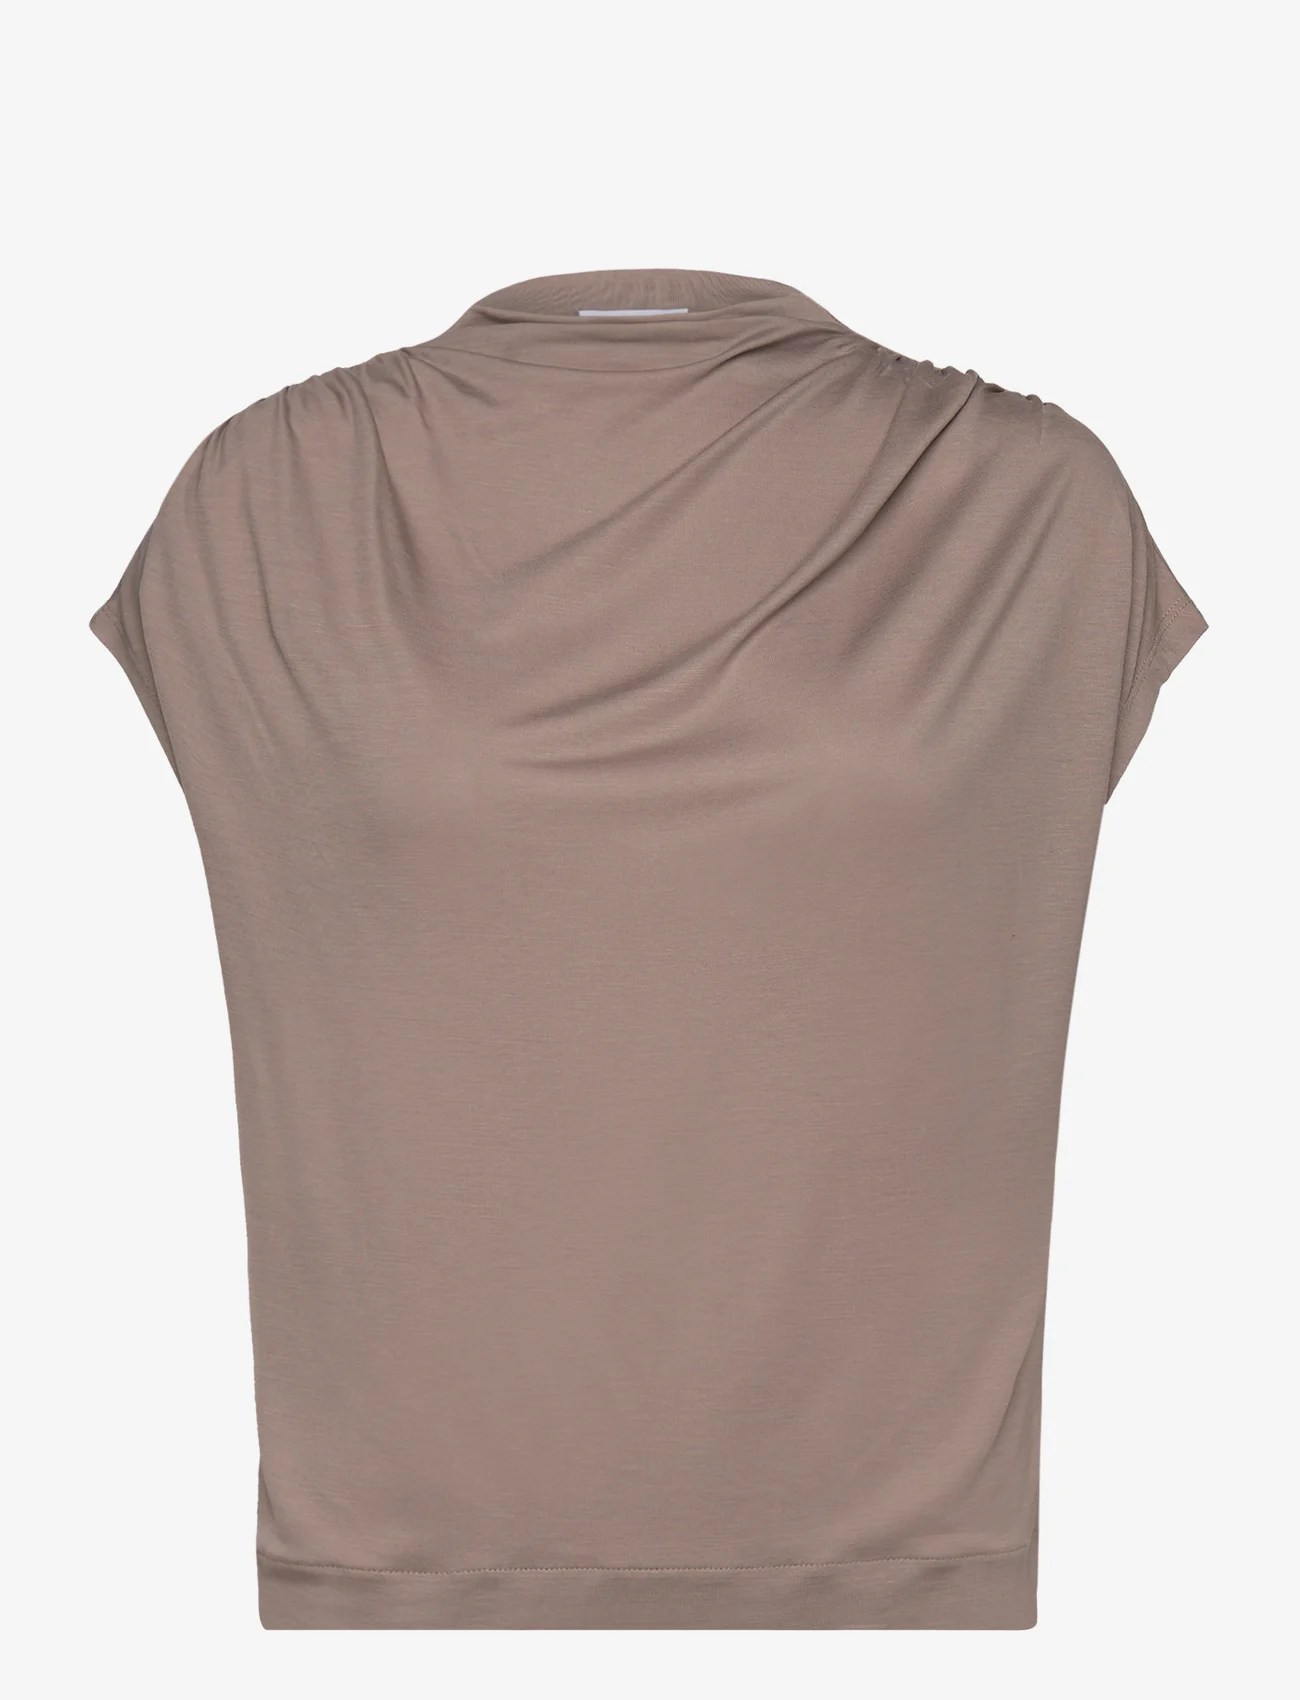 Esprit Casual - T-Shirts - t-shirts - light taupe - 0